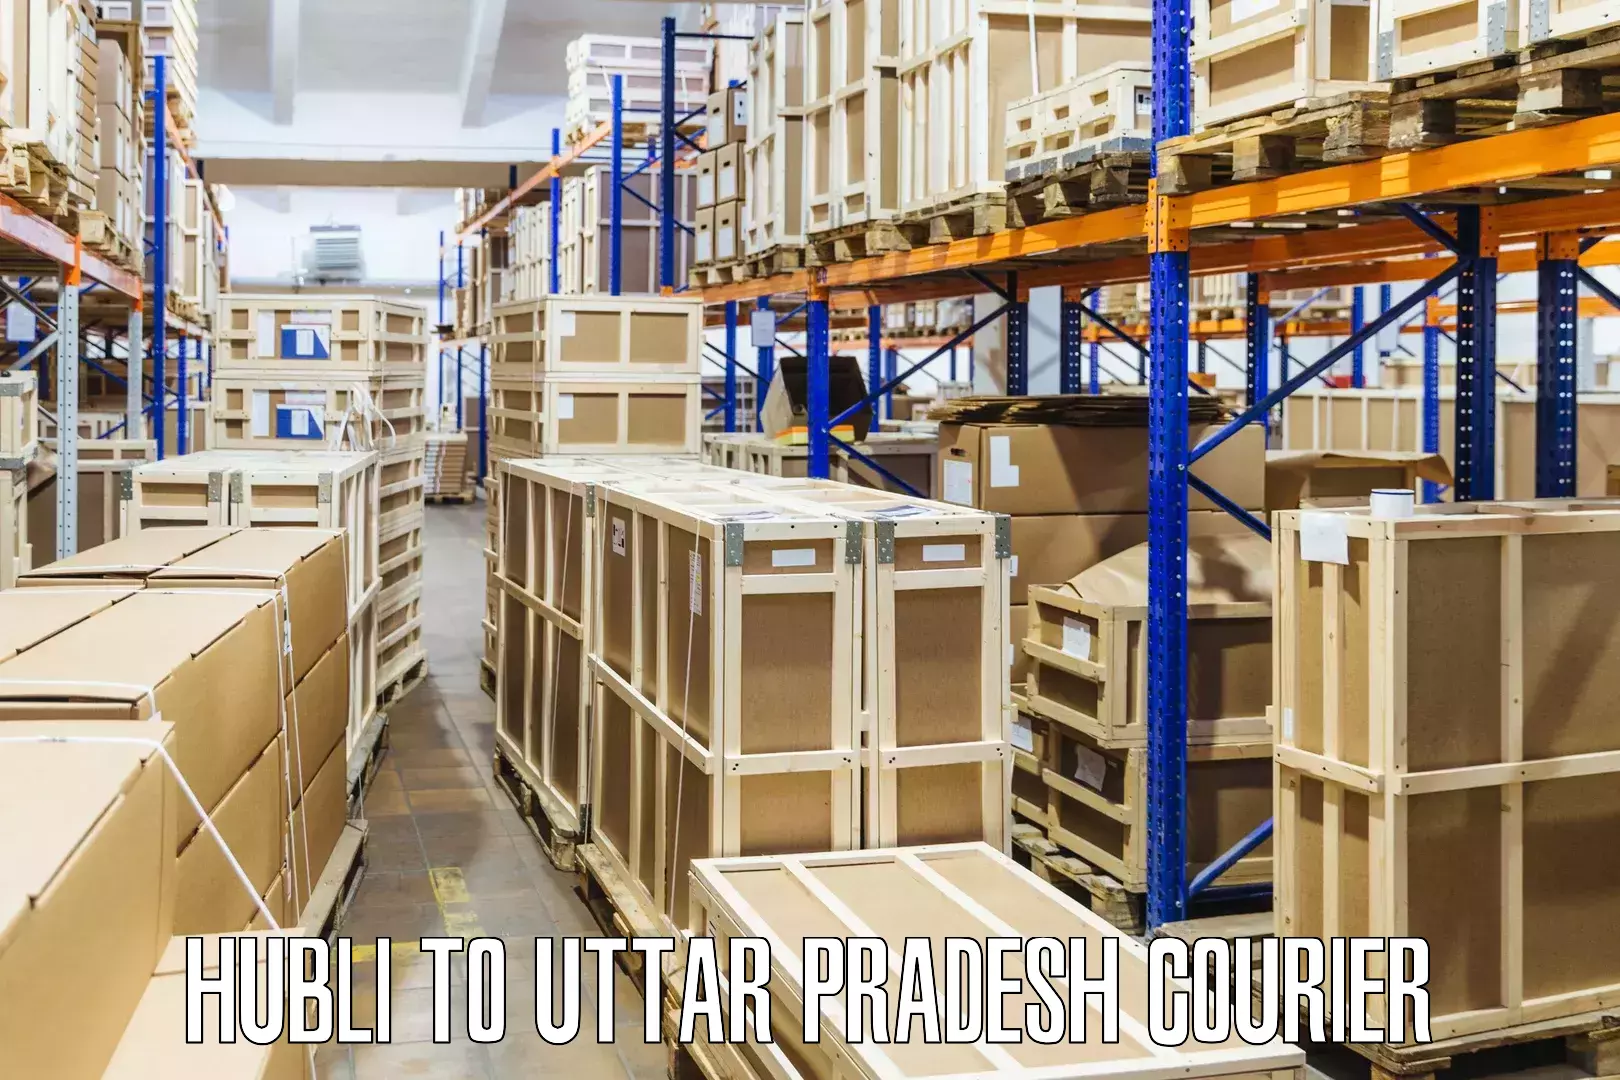 Round-the-clock parcel delivery Hubli to Siddharthnagar